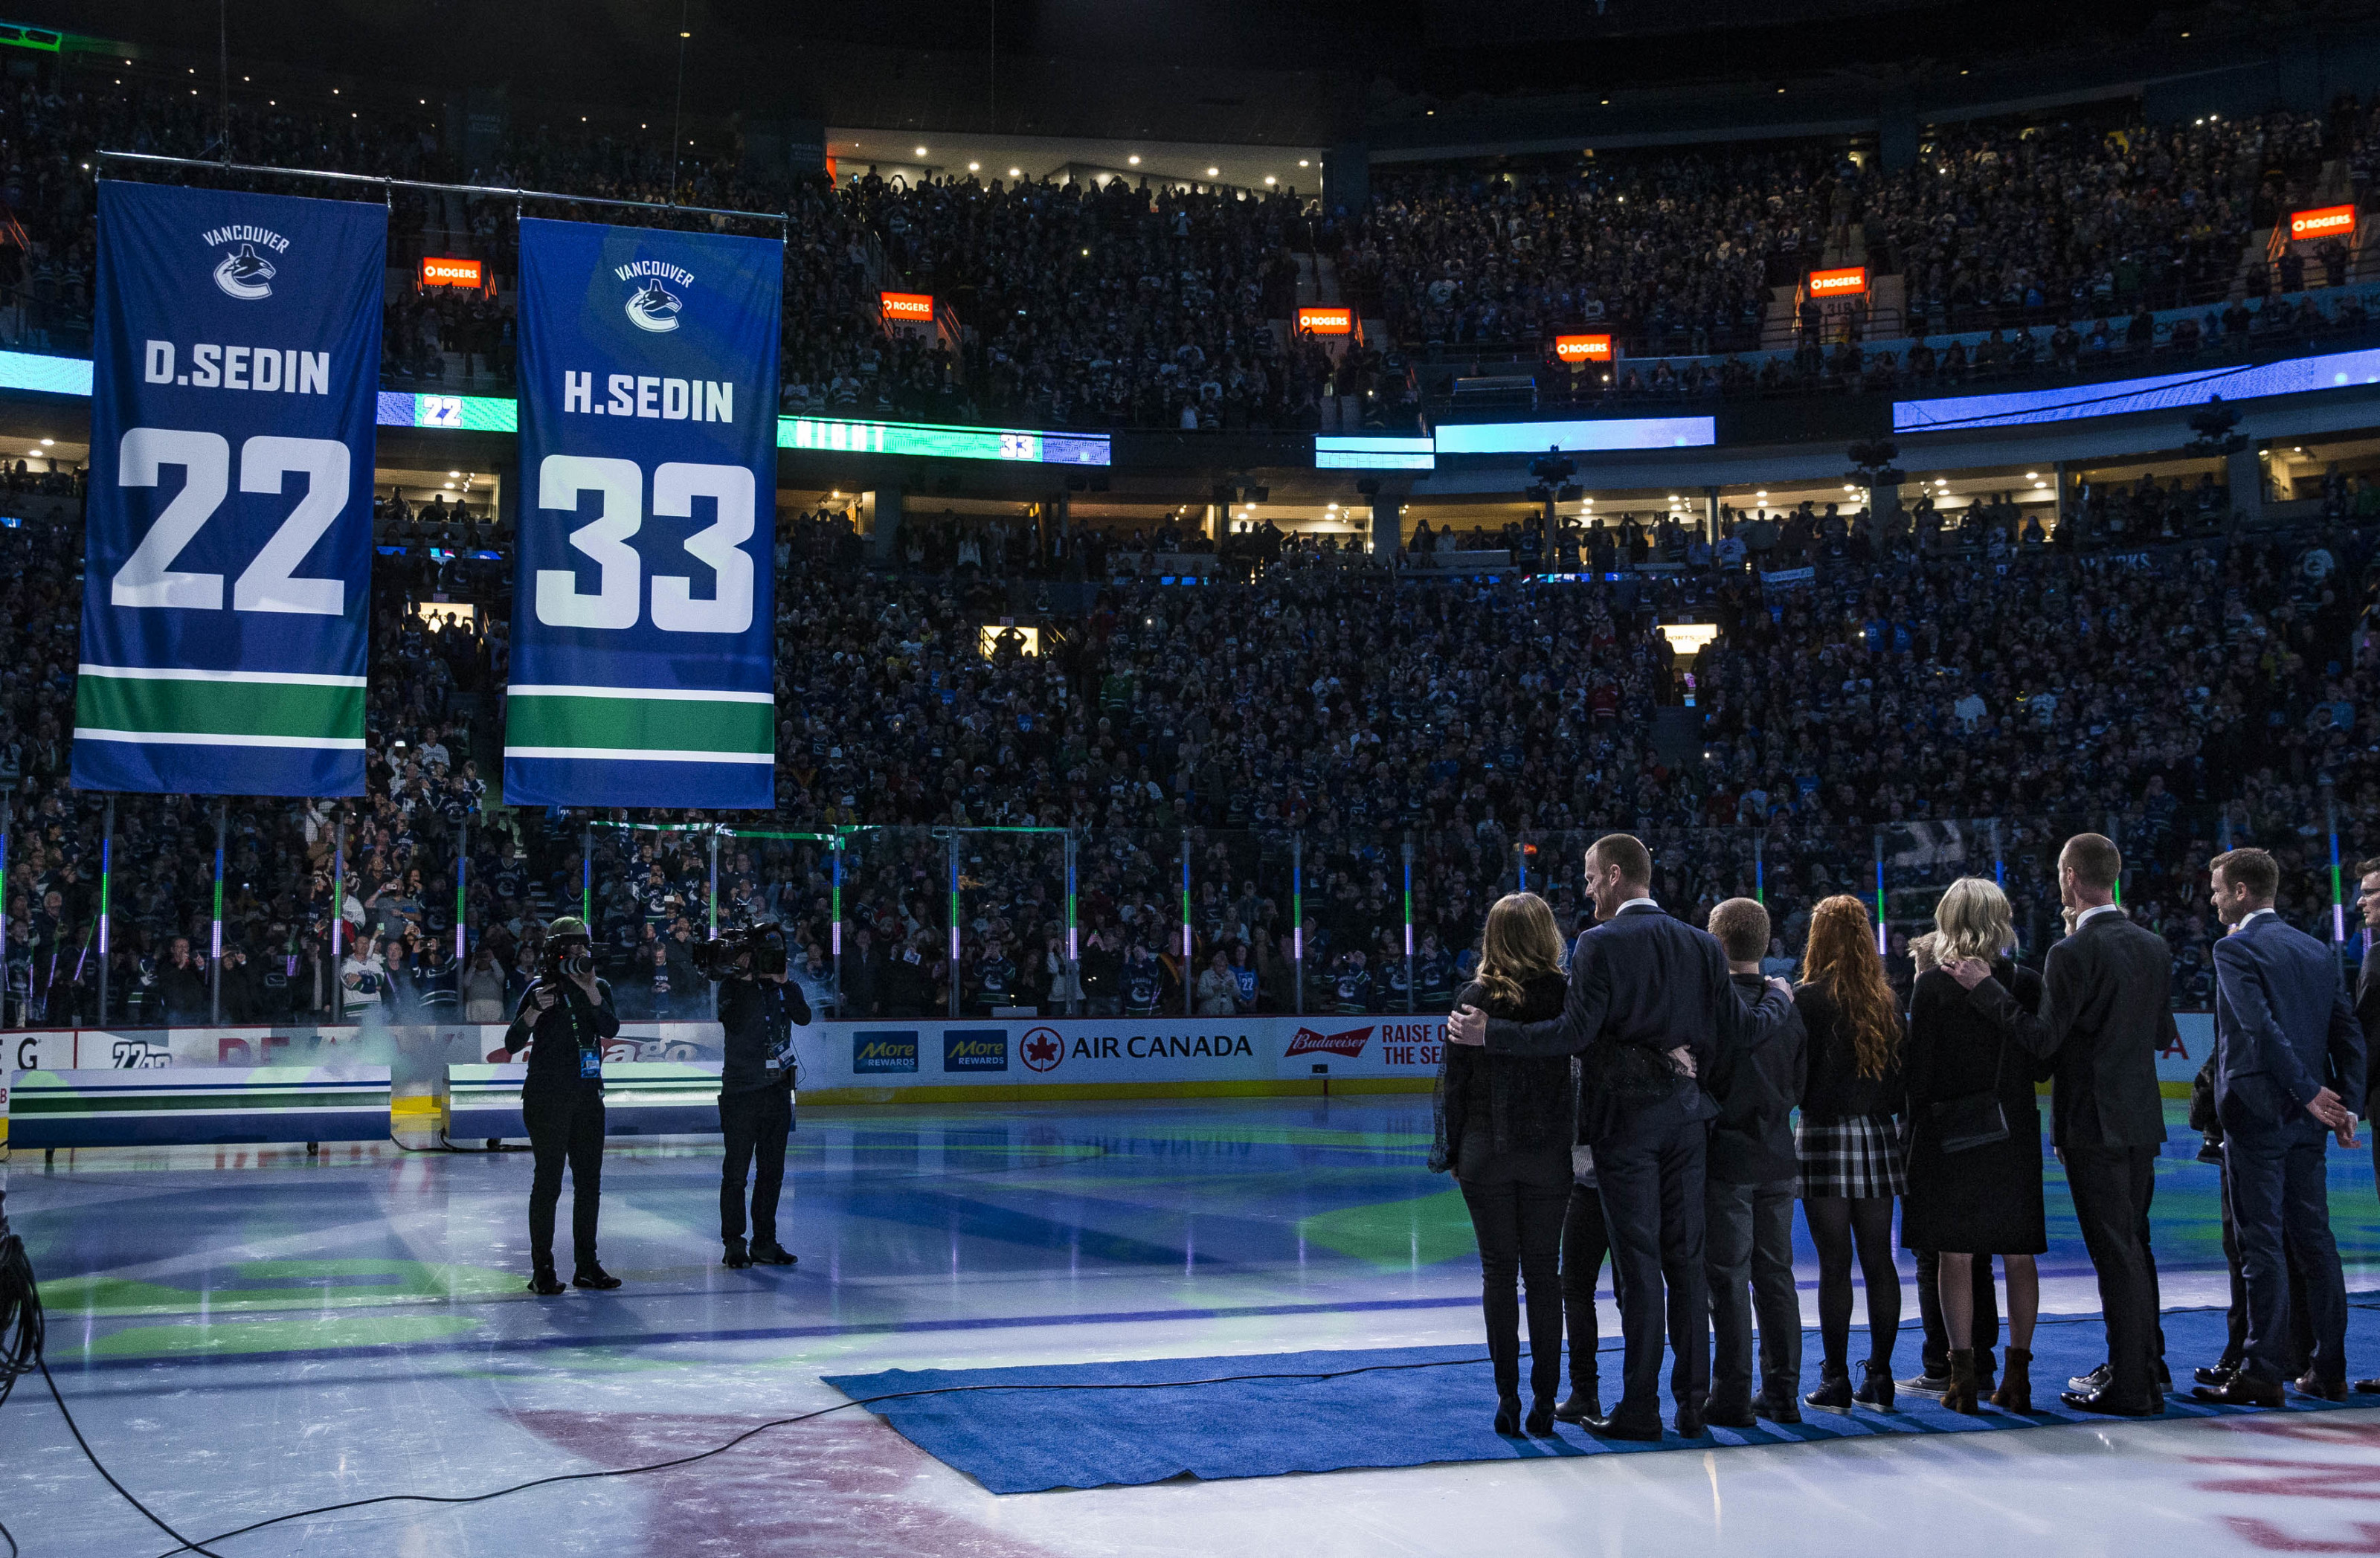 Trevor Linden to take part in Canucks jersey-retirement night for